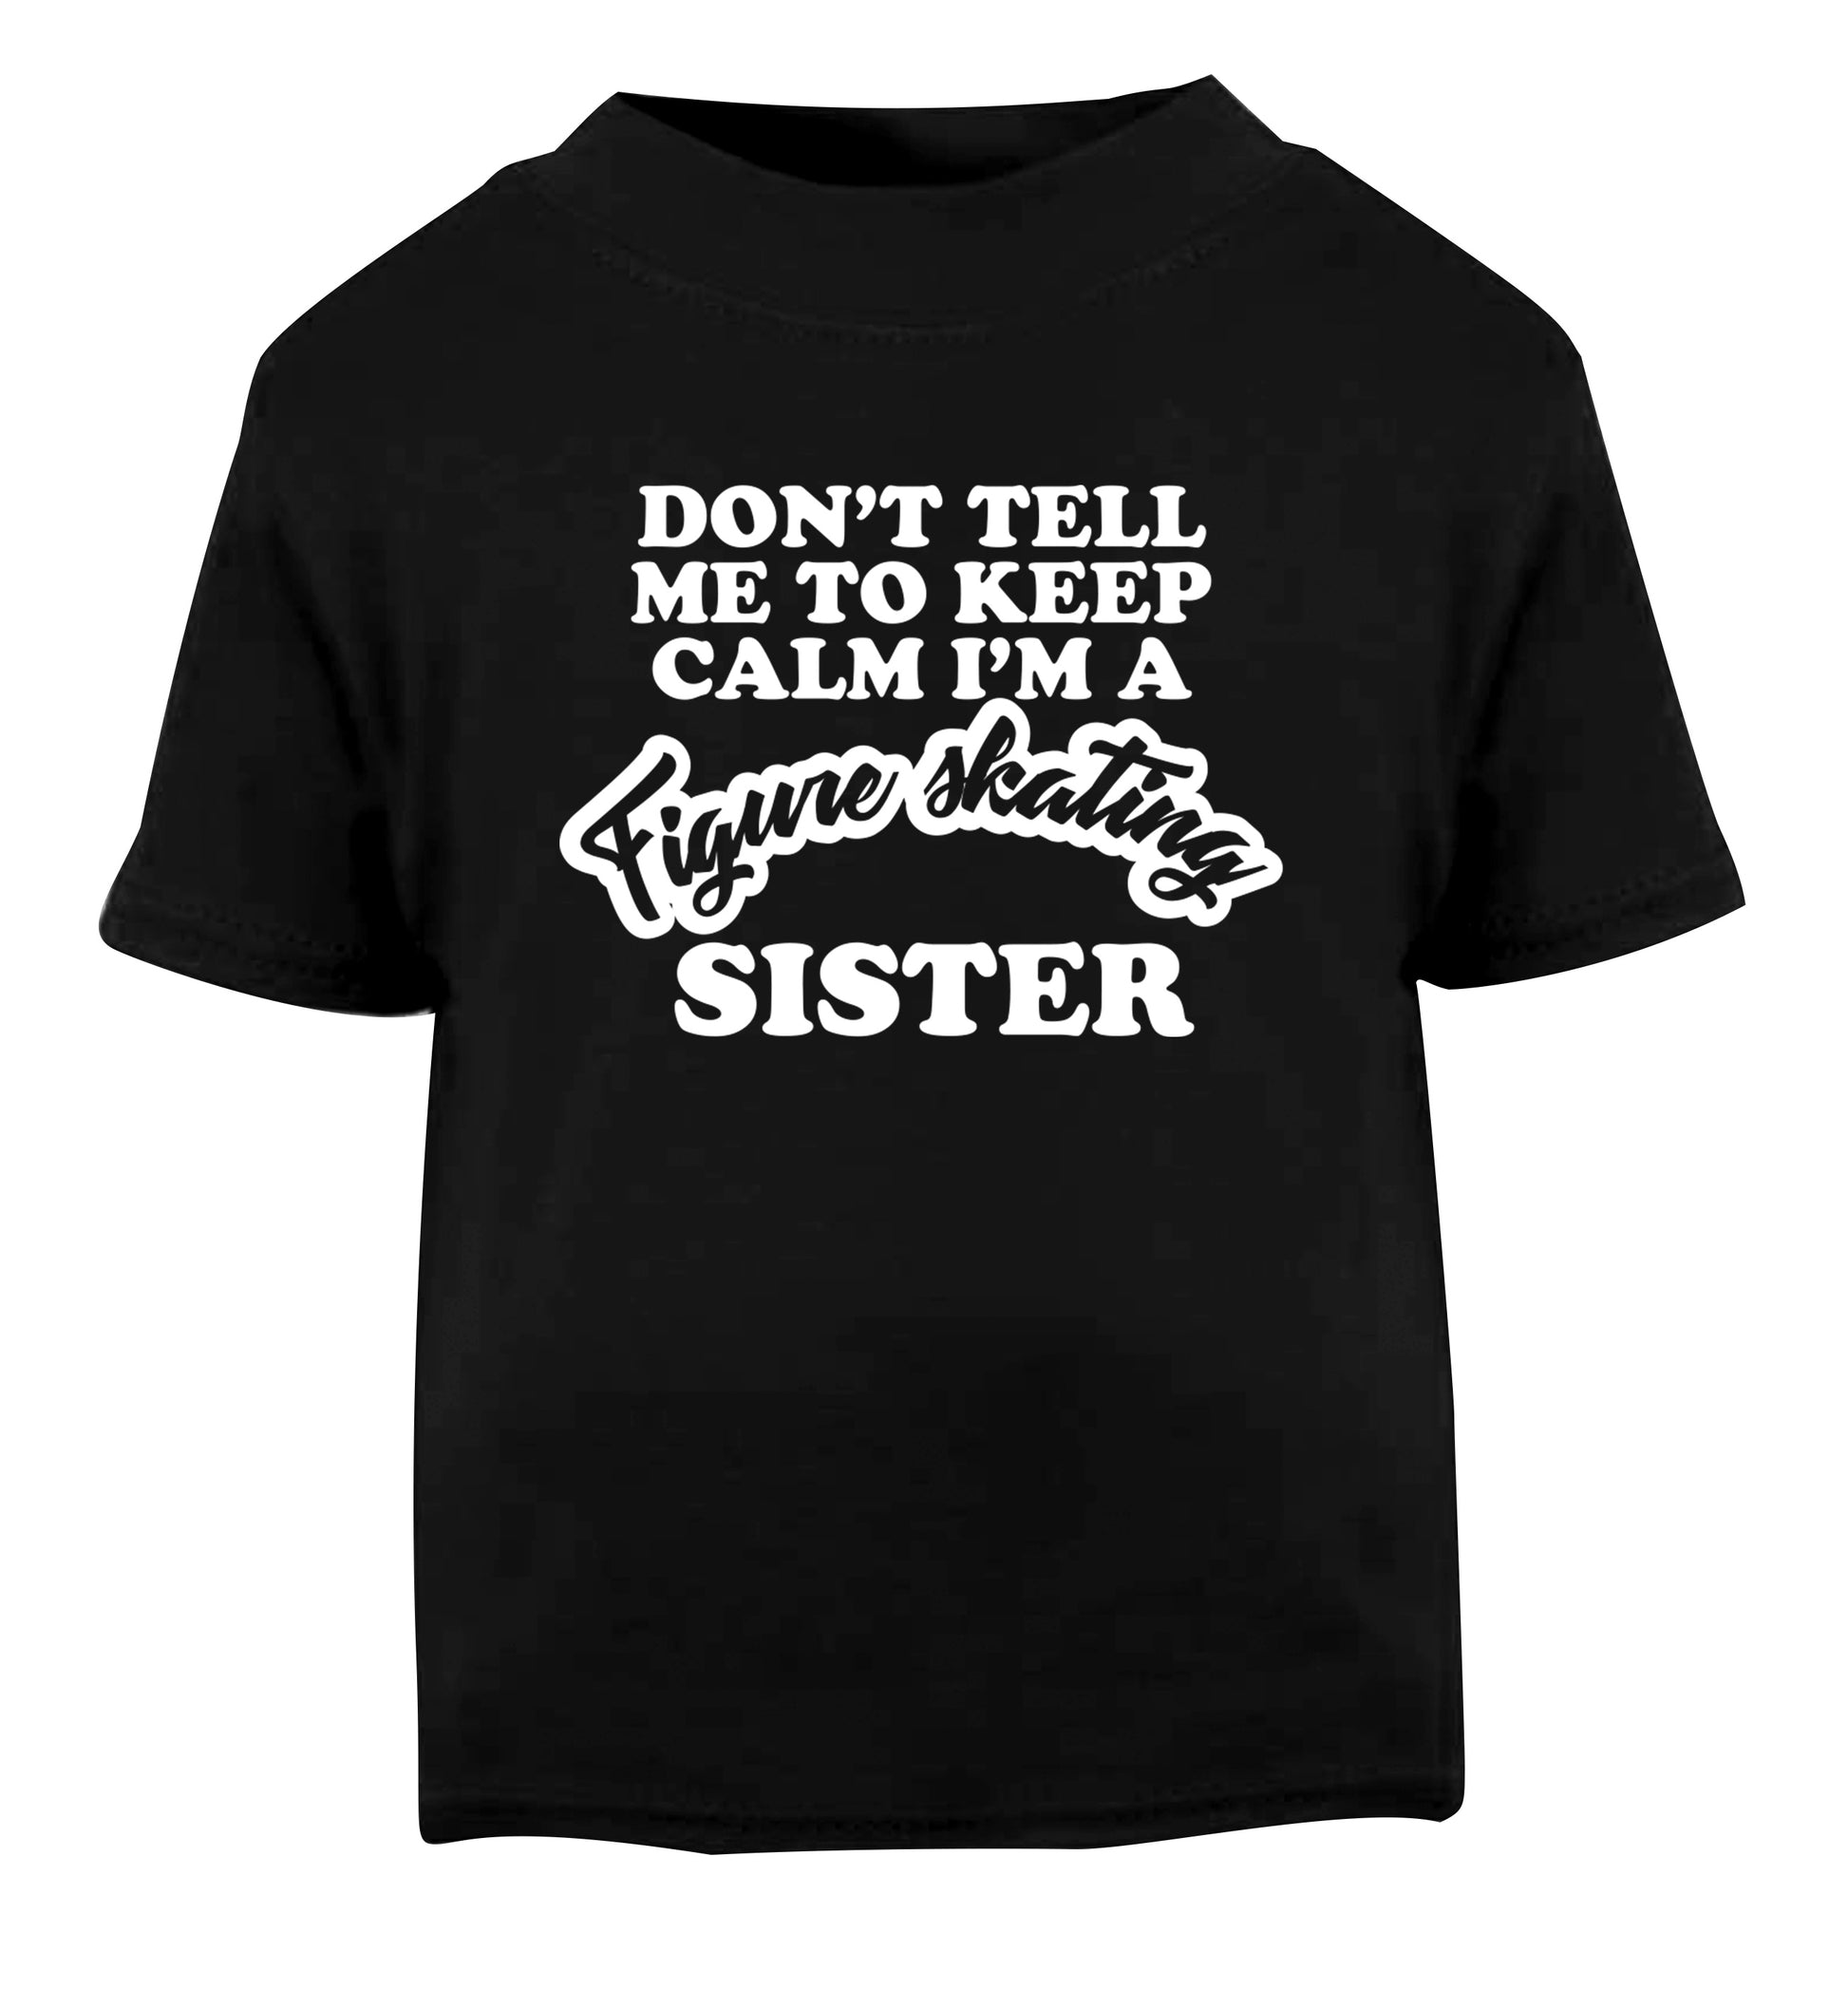 Don't tell me to keep calm I'm a figure skating sister Black Baby Toddler Tshirt 2 years